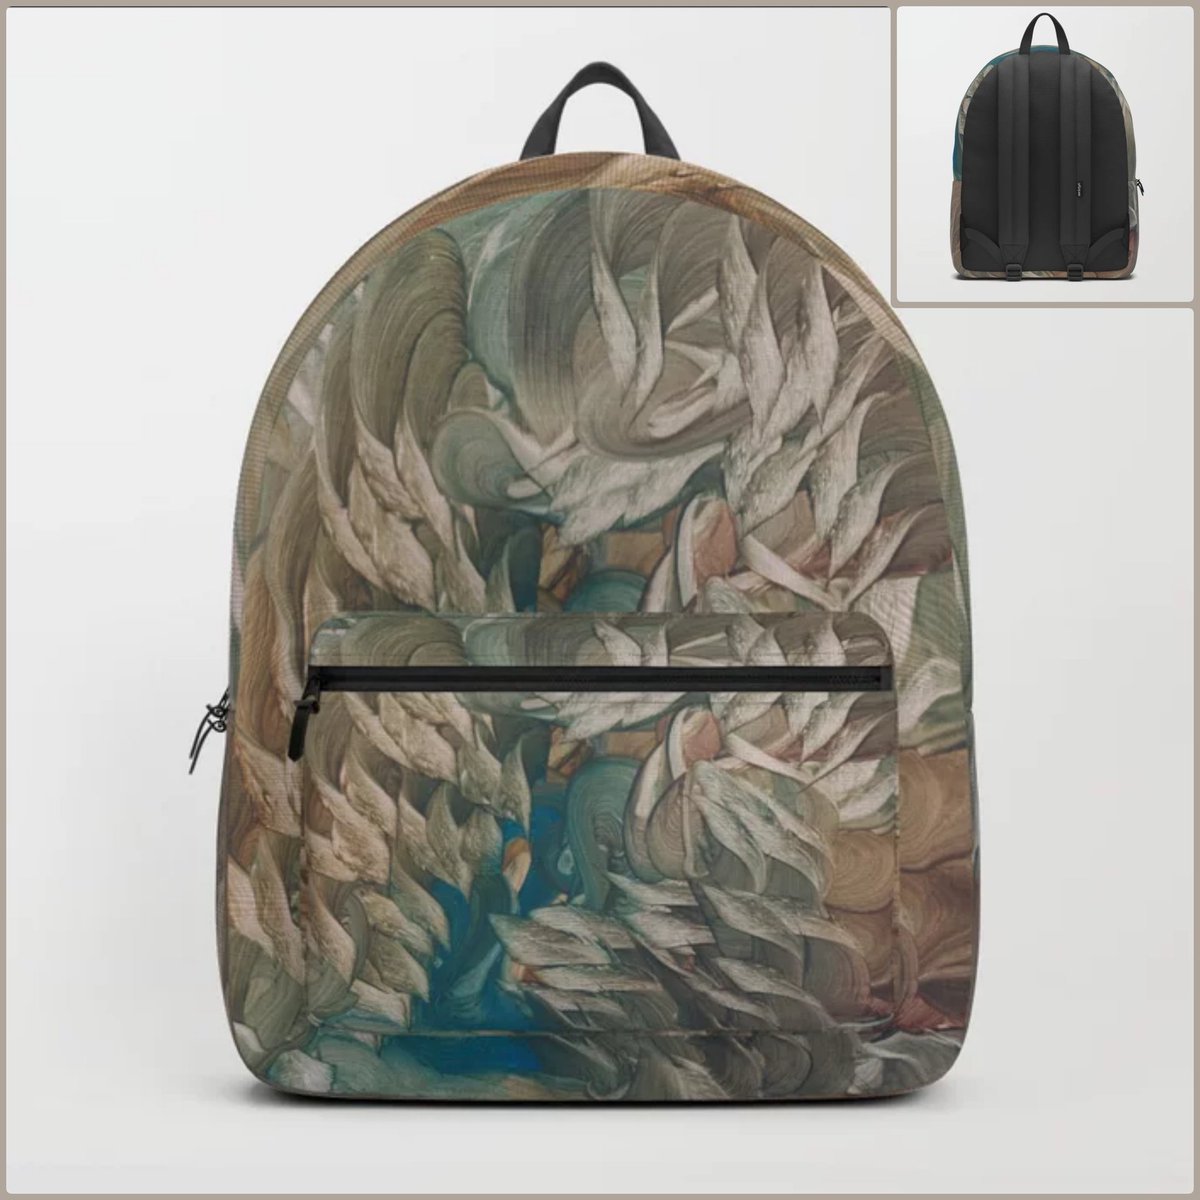 Mellona Backpack ~by Art Falaxy~
~Art of Unique!~ #artfalaxy #art #totes #bags #fashion #society6 #Society6max #trendy #accessories #swirls #modern #duffel #backpacks #fannypacks #pouches #blue #gray #brown #beige #offwhite

society6.com/product/mellon…